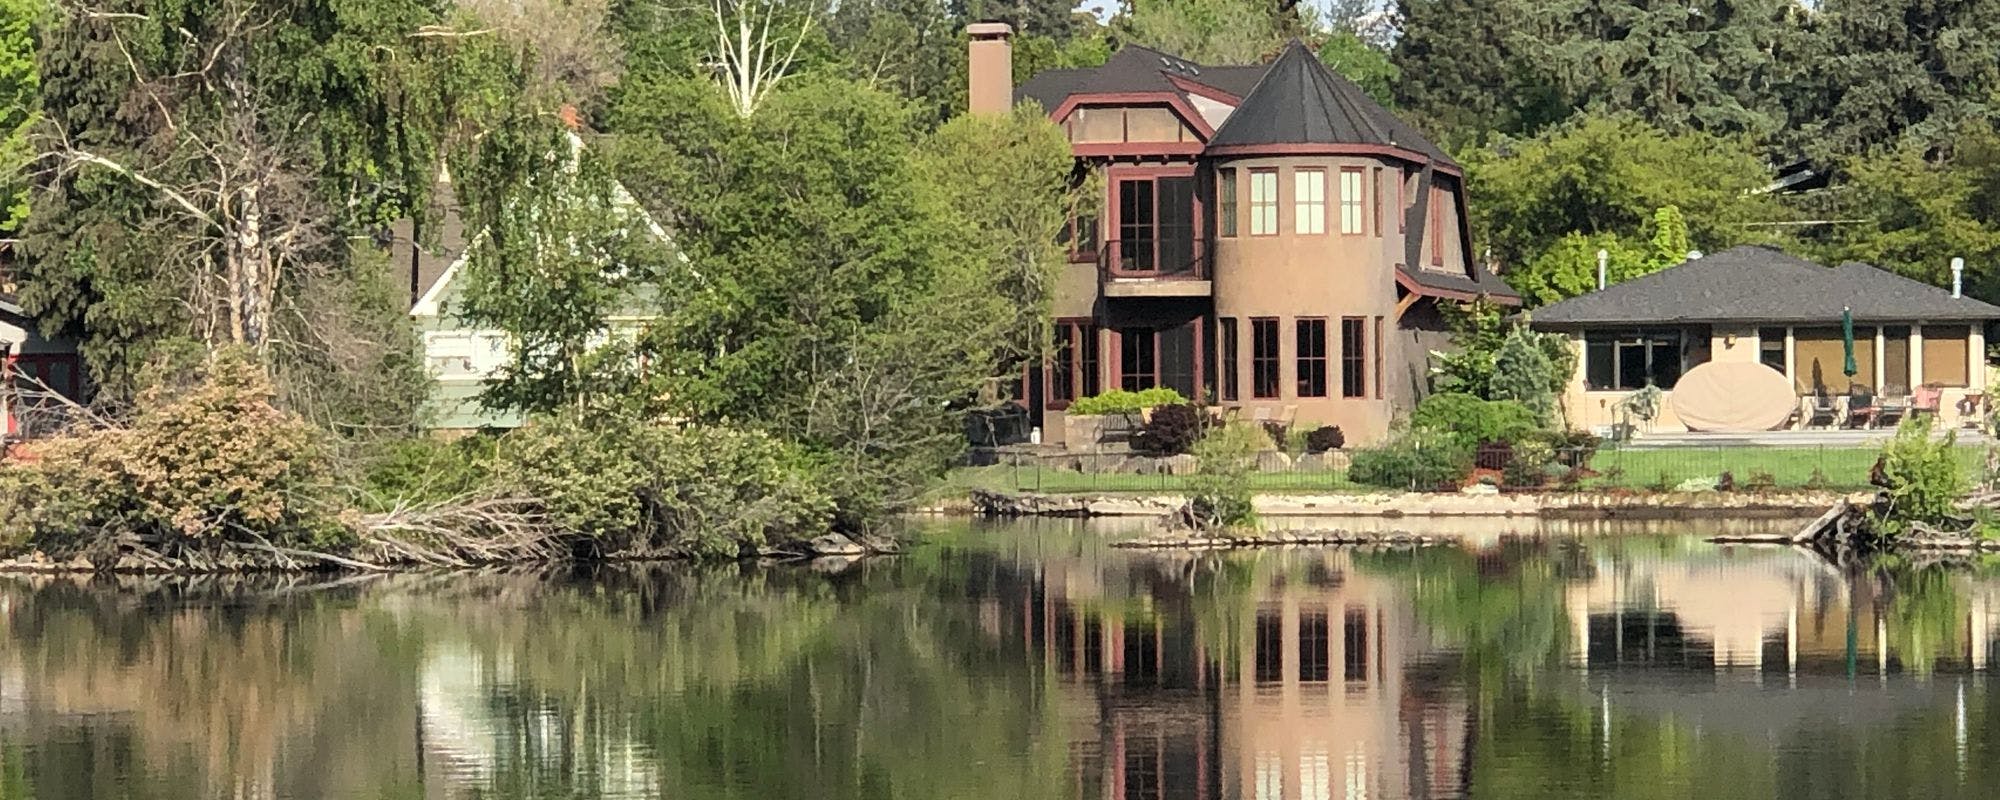 Tudor-style Bend rental villa on the banks of the Deschutes River by Arrived